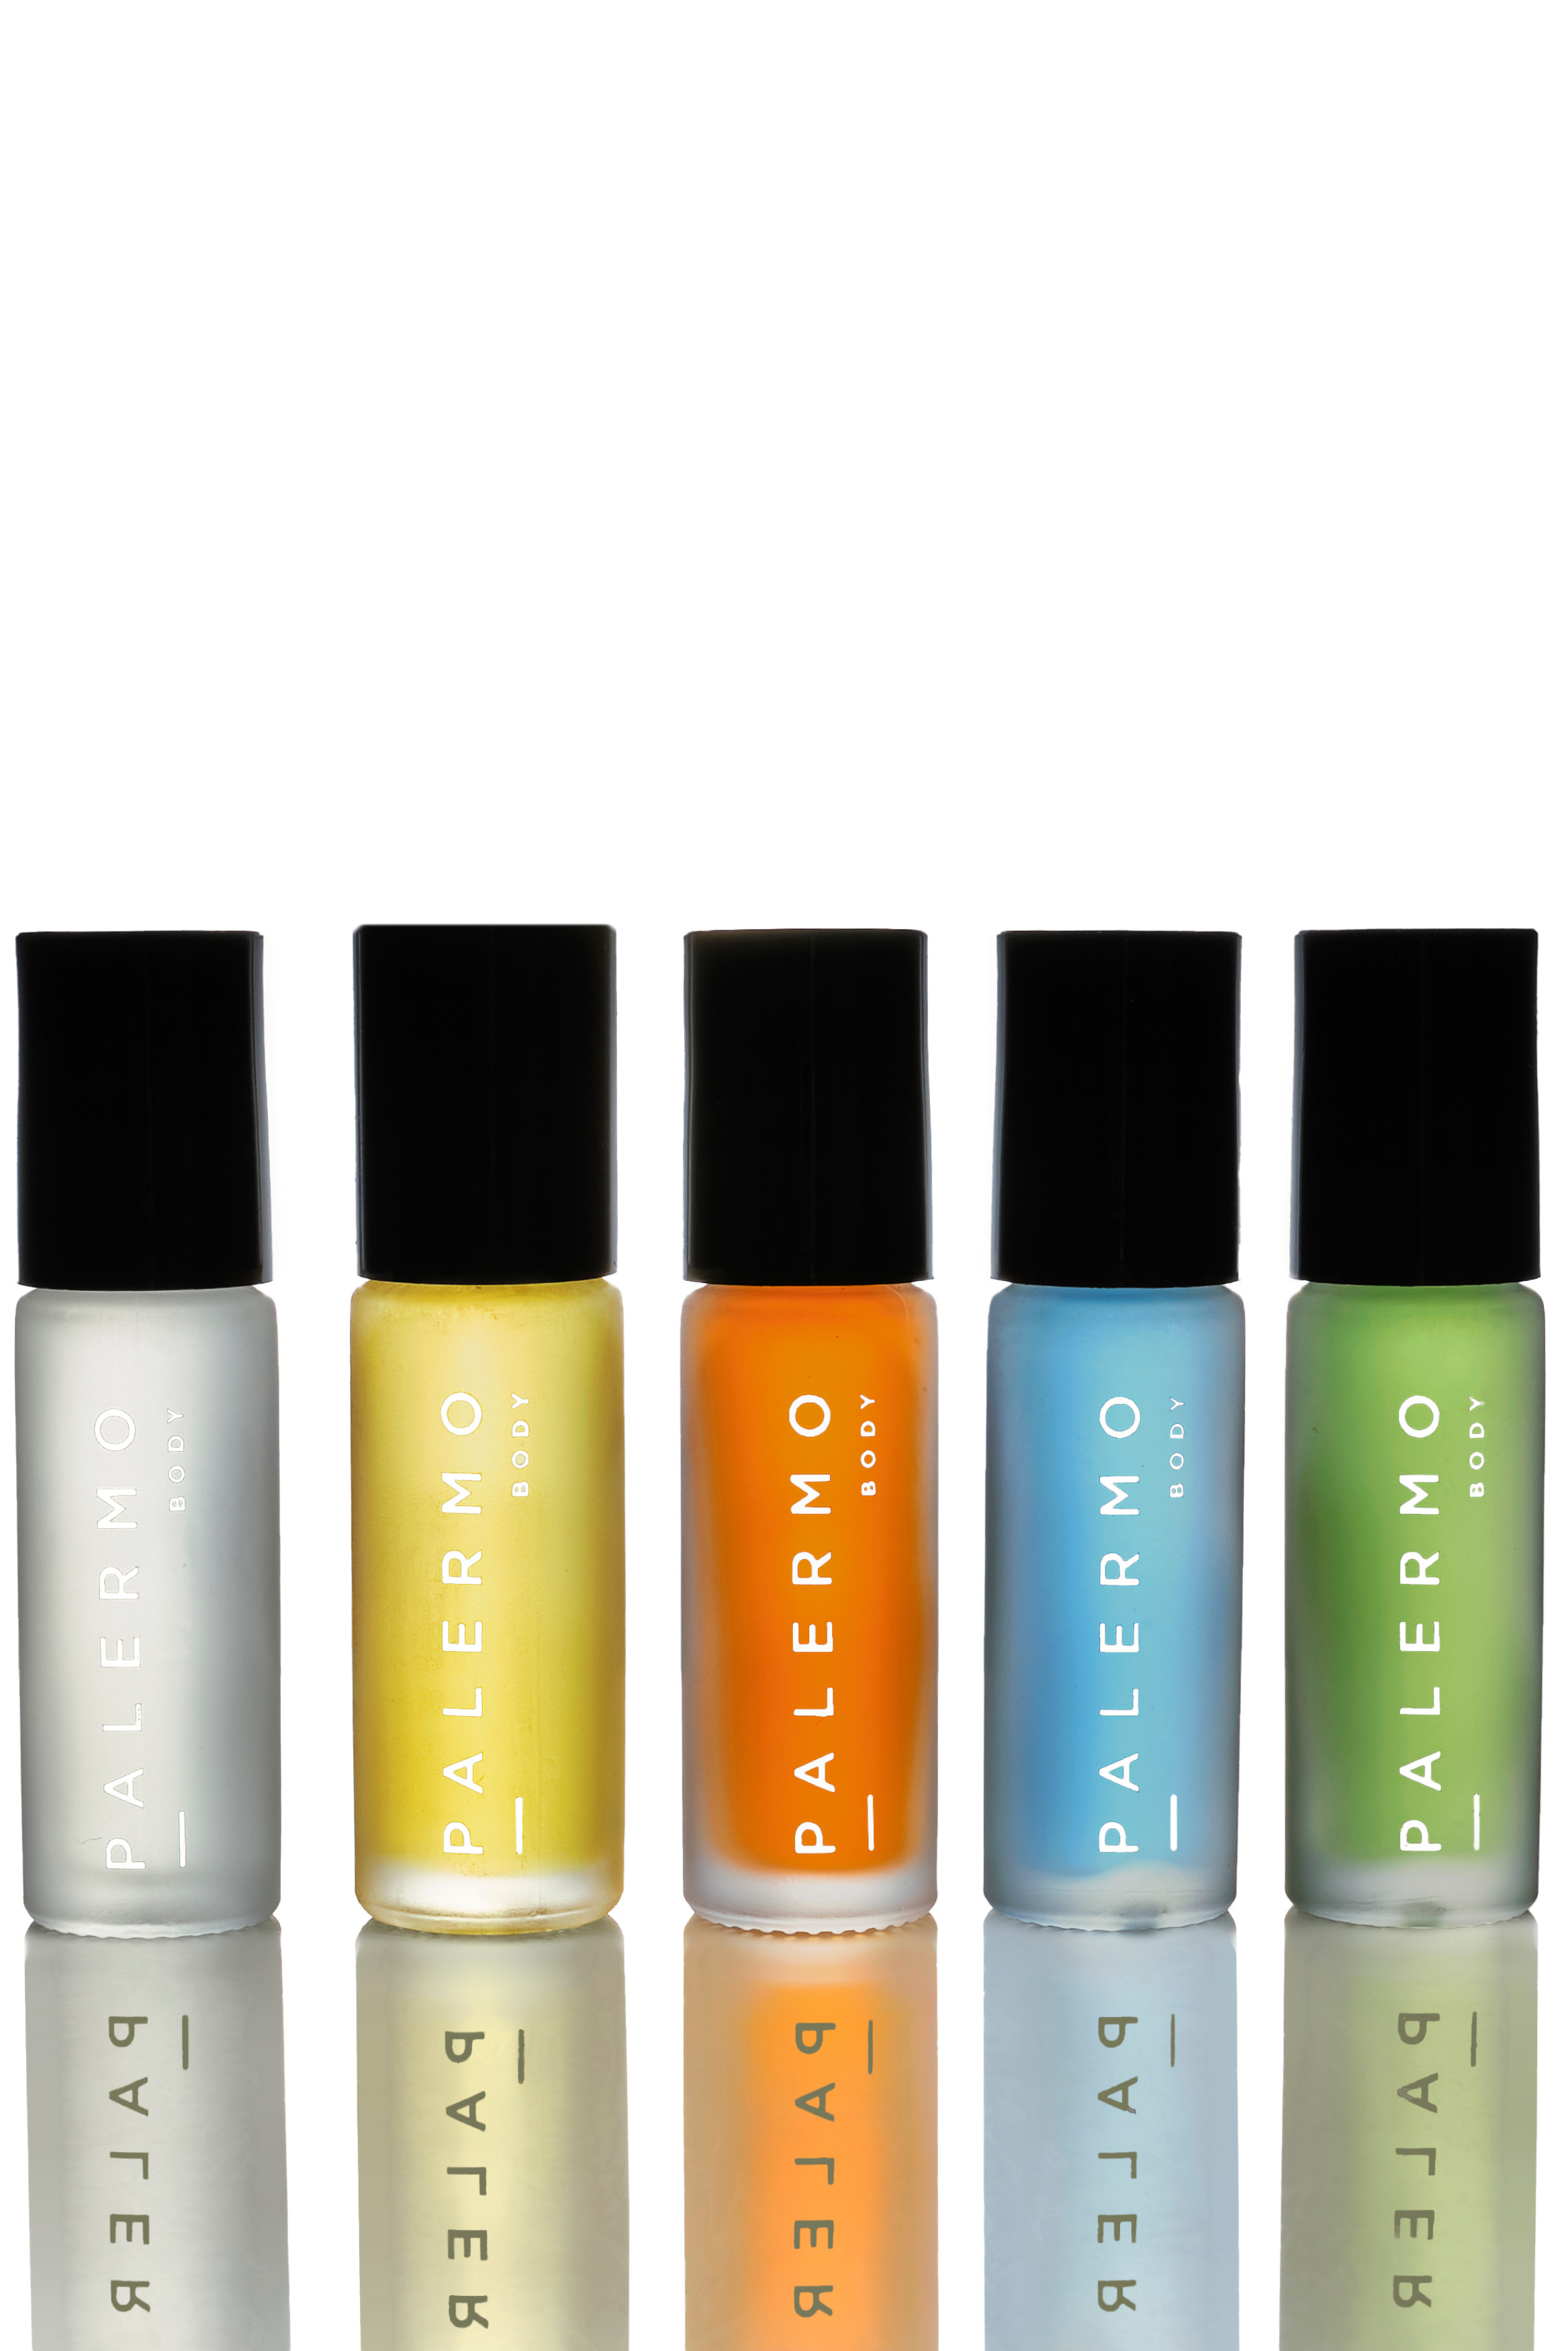 The Aromatherapy Collection